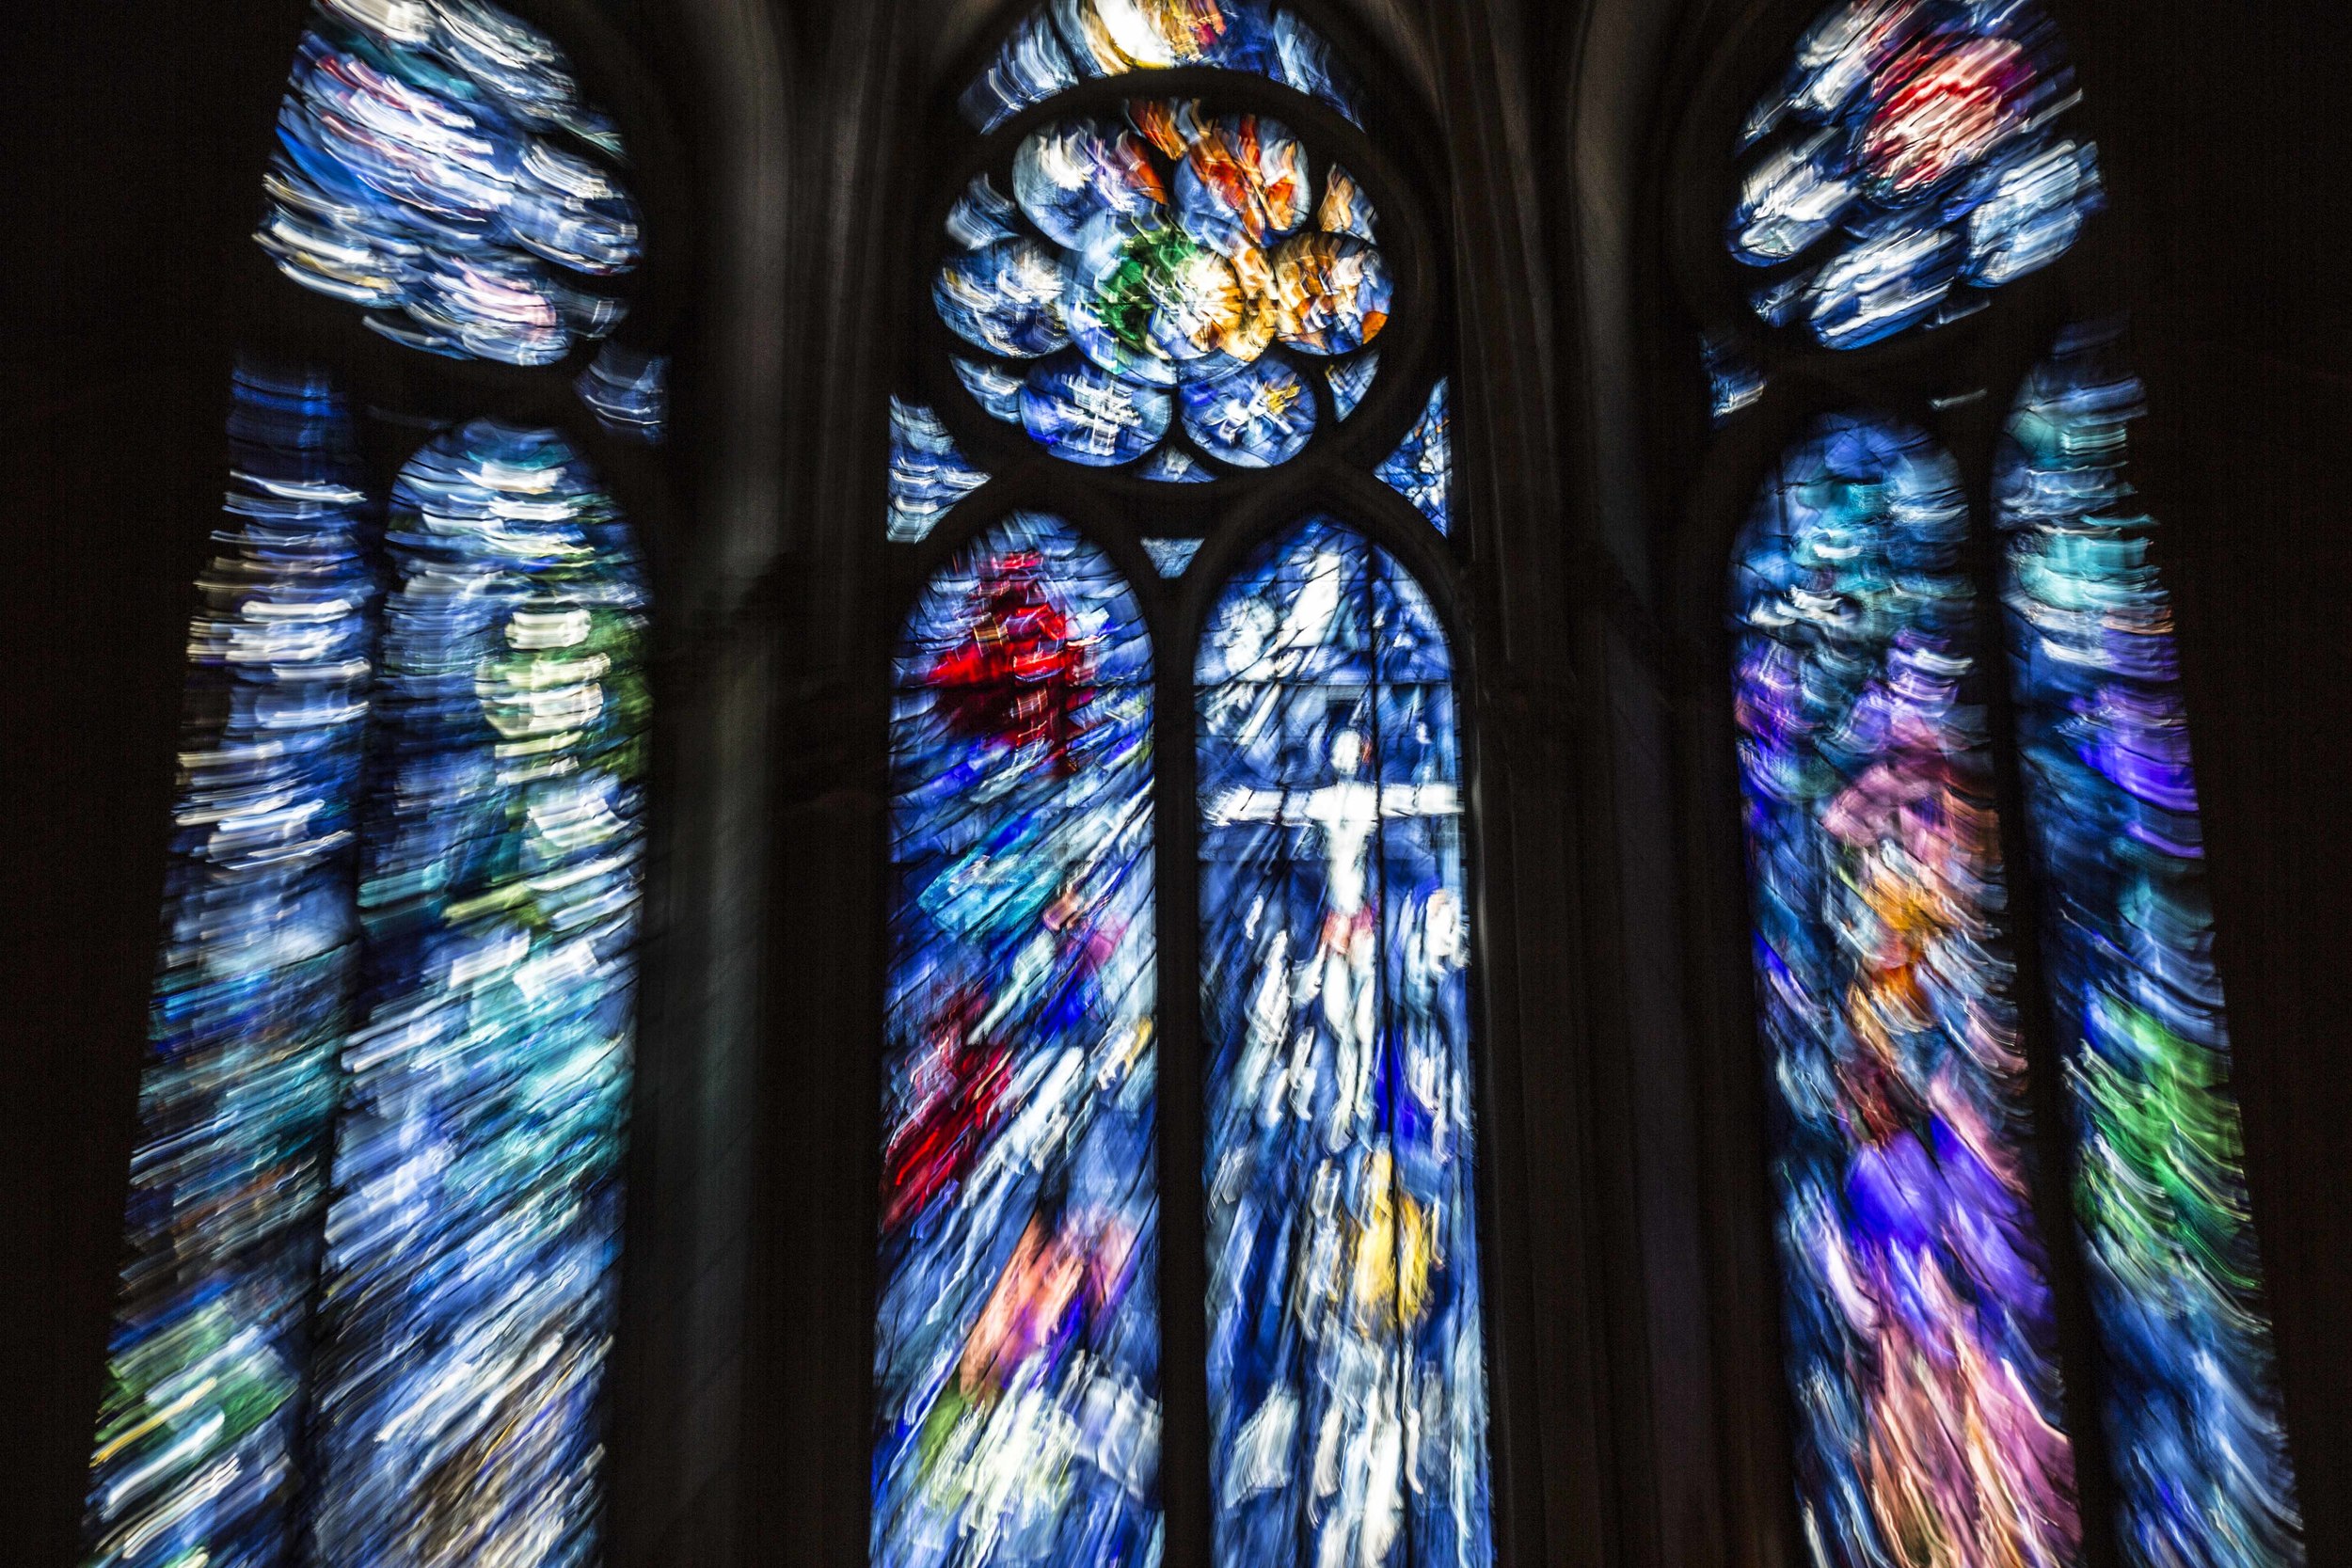 Colors of Reims Cathedral #3, 2012